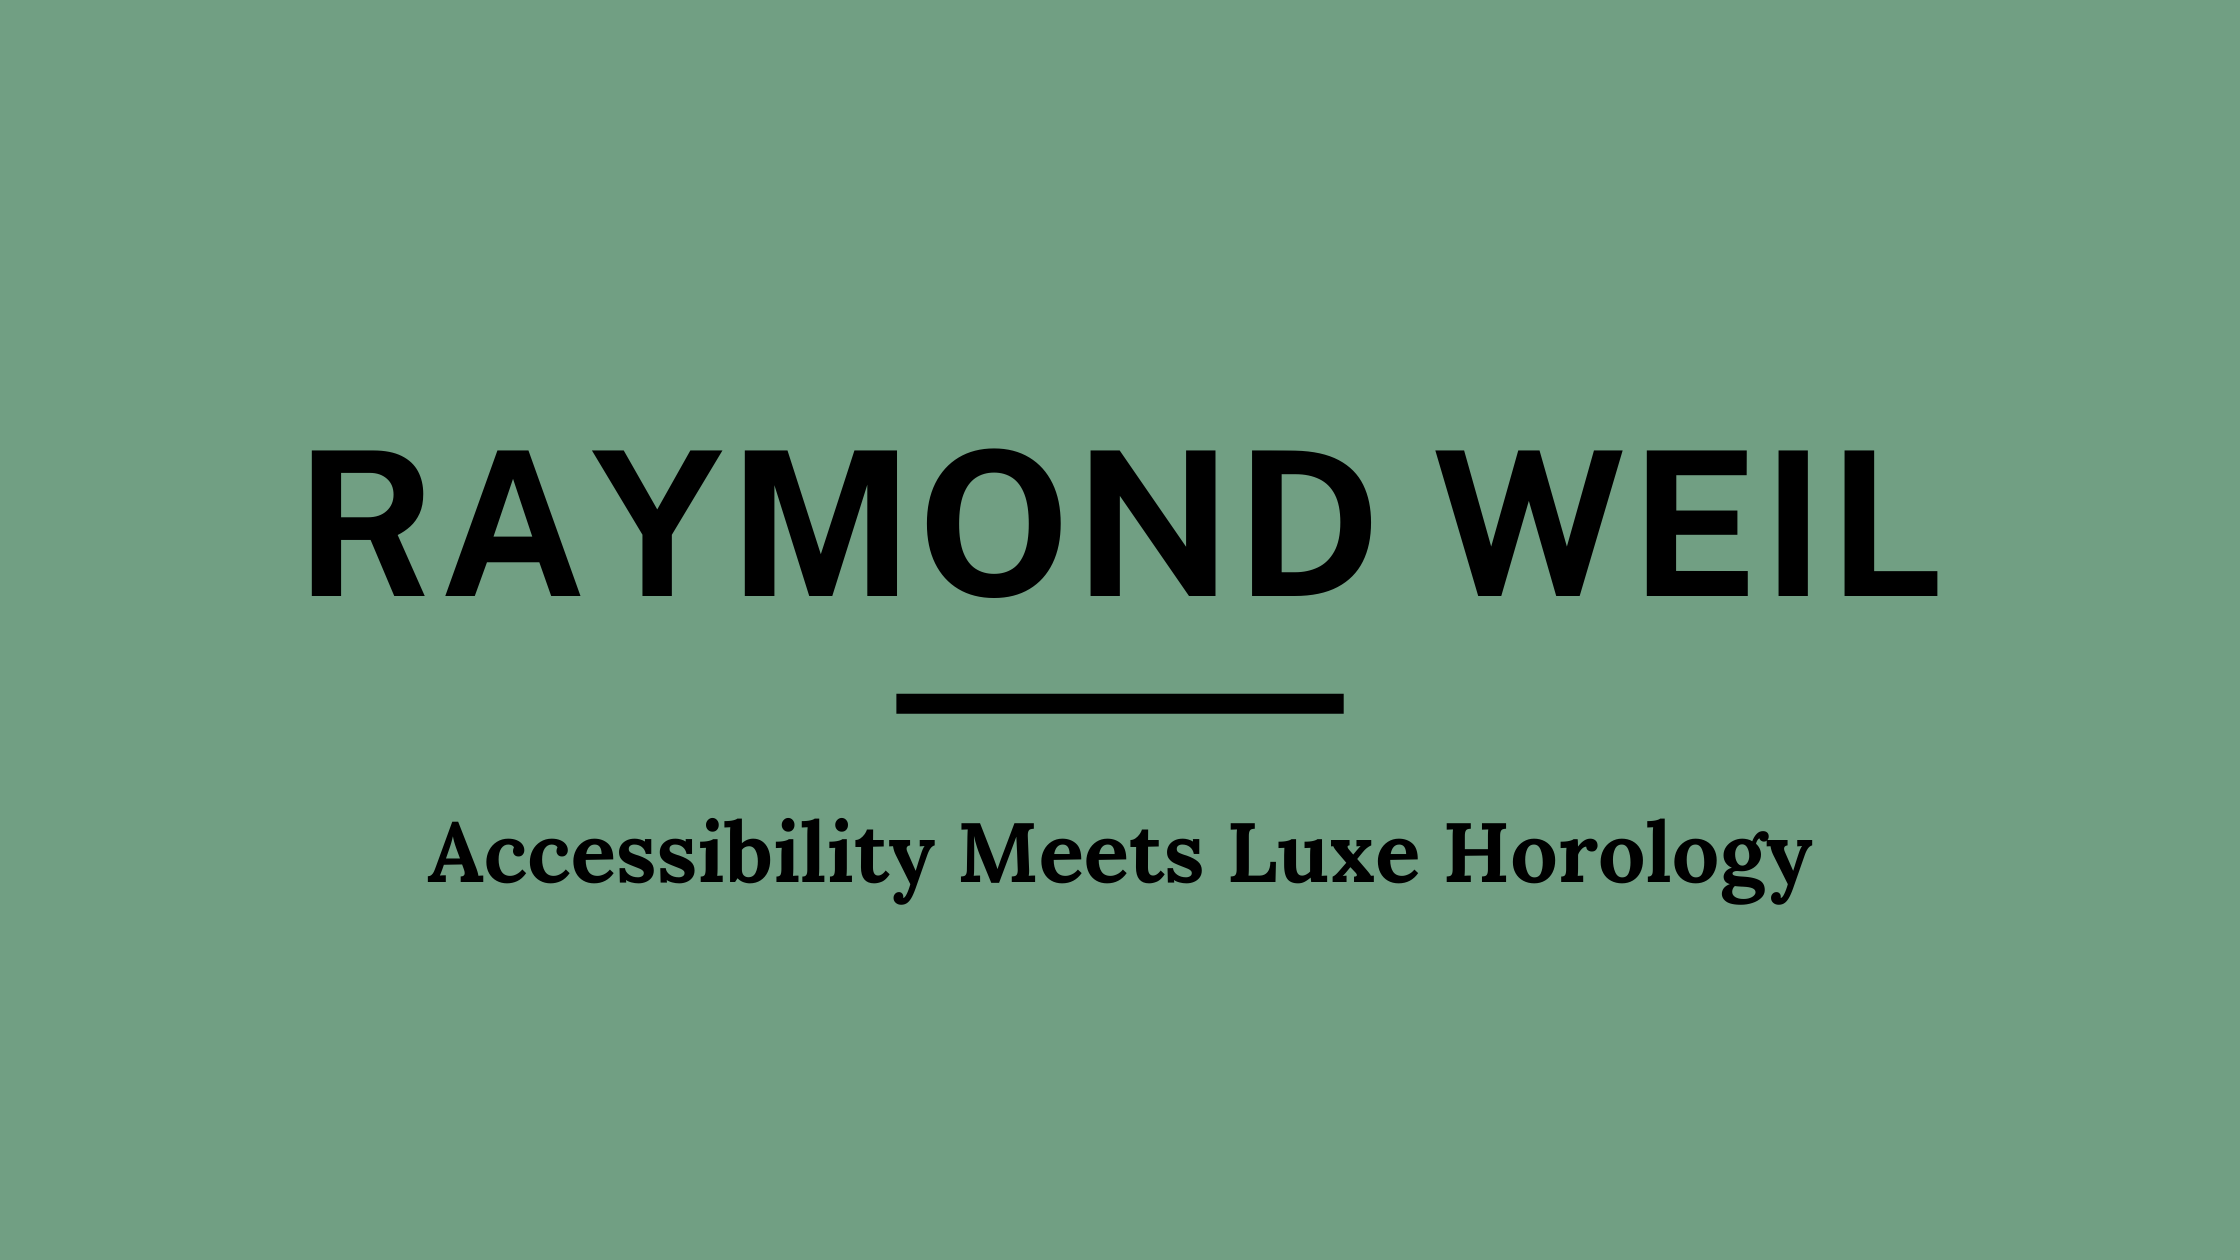 Raymond Weil: Where Accessibility Meets Luxe Horology